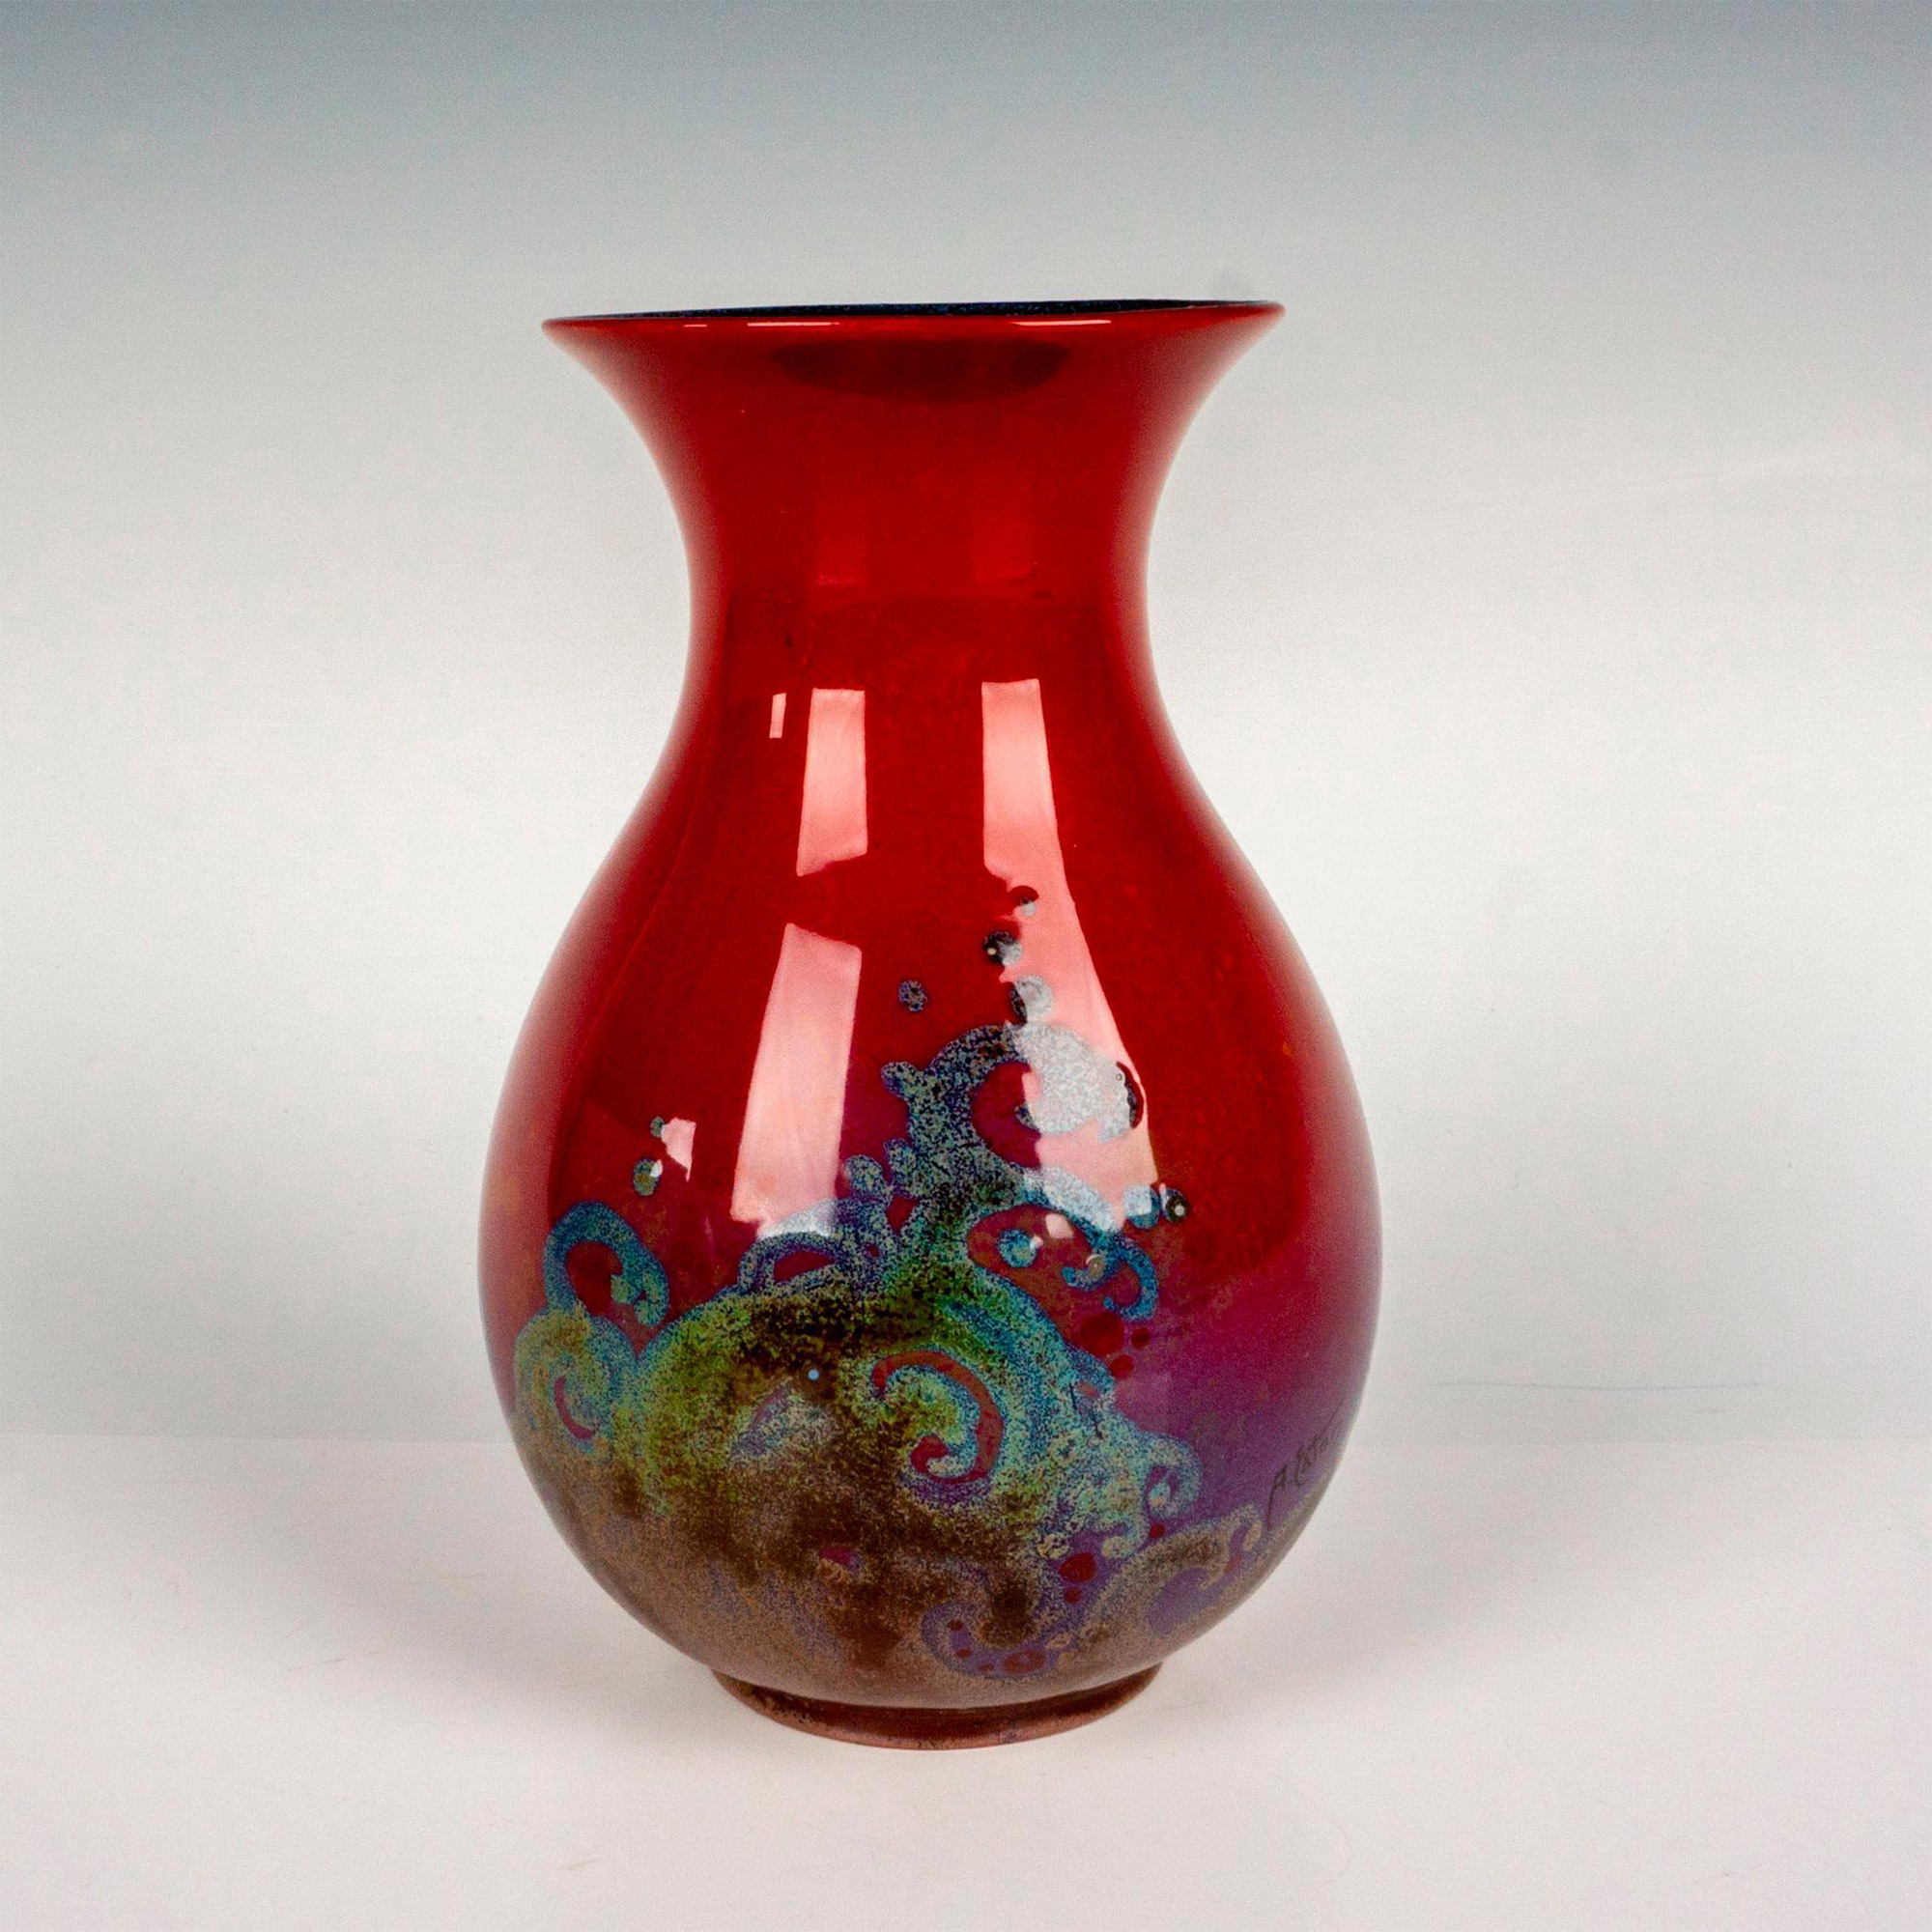 Royal Doulton Sung Flambe Veined Vase by Arthur Eaton - Image 2 of 3